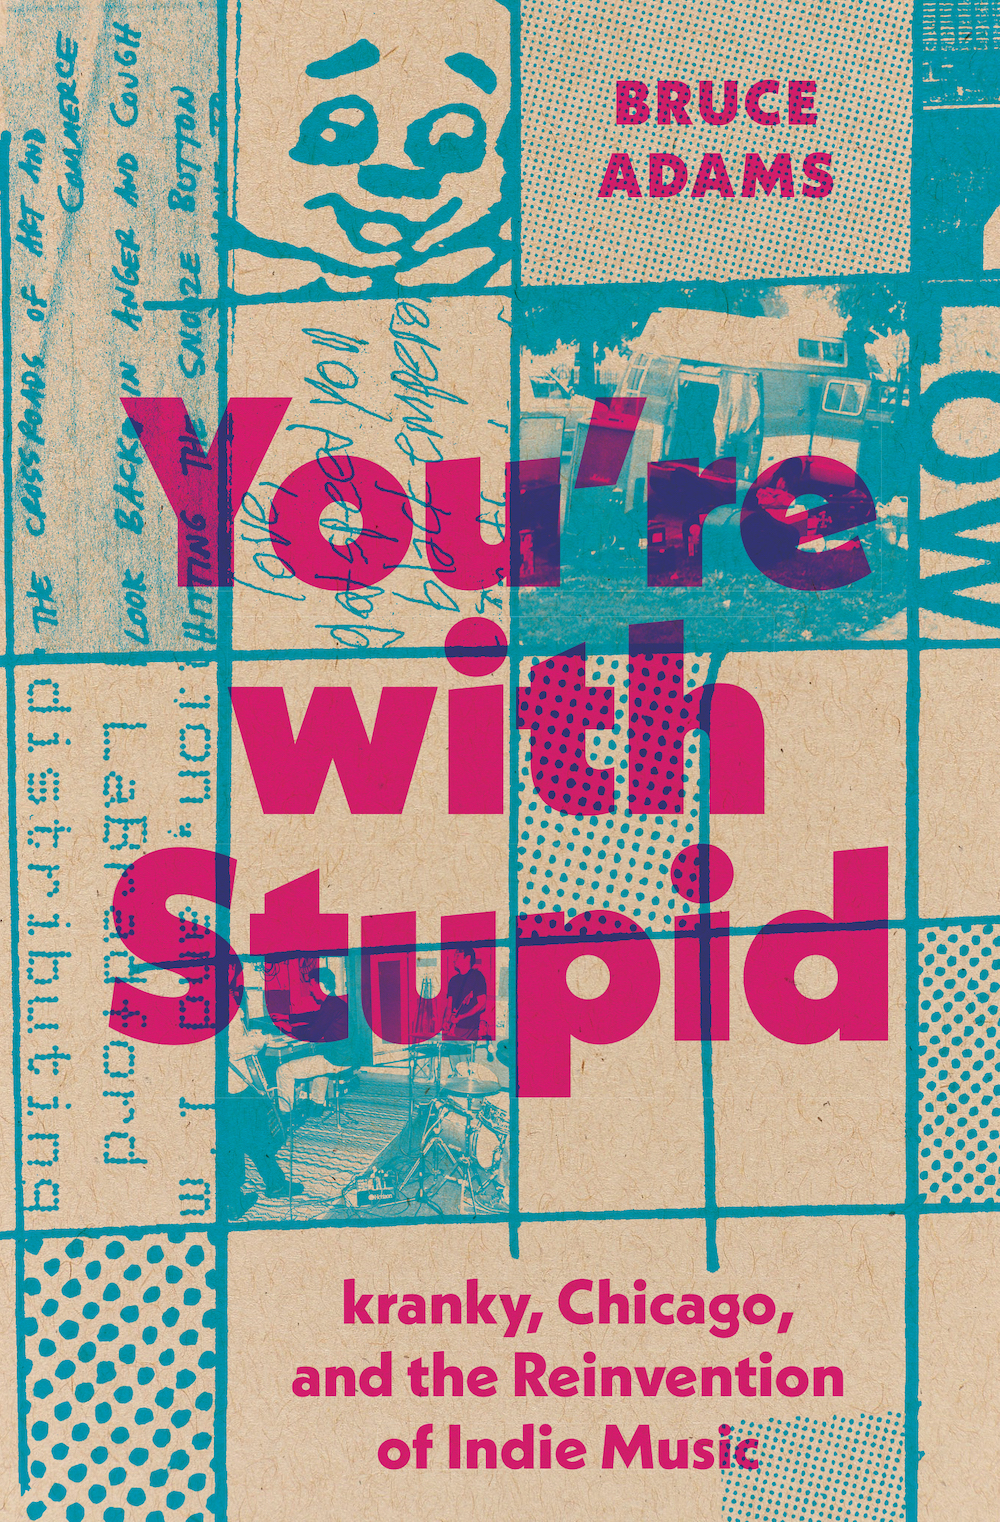 Bruce Adams releases book, You’re with Stupid